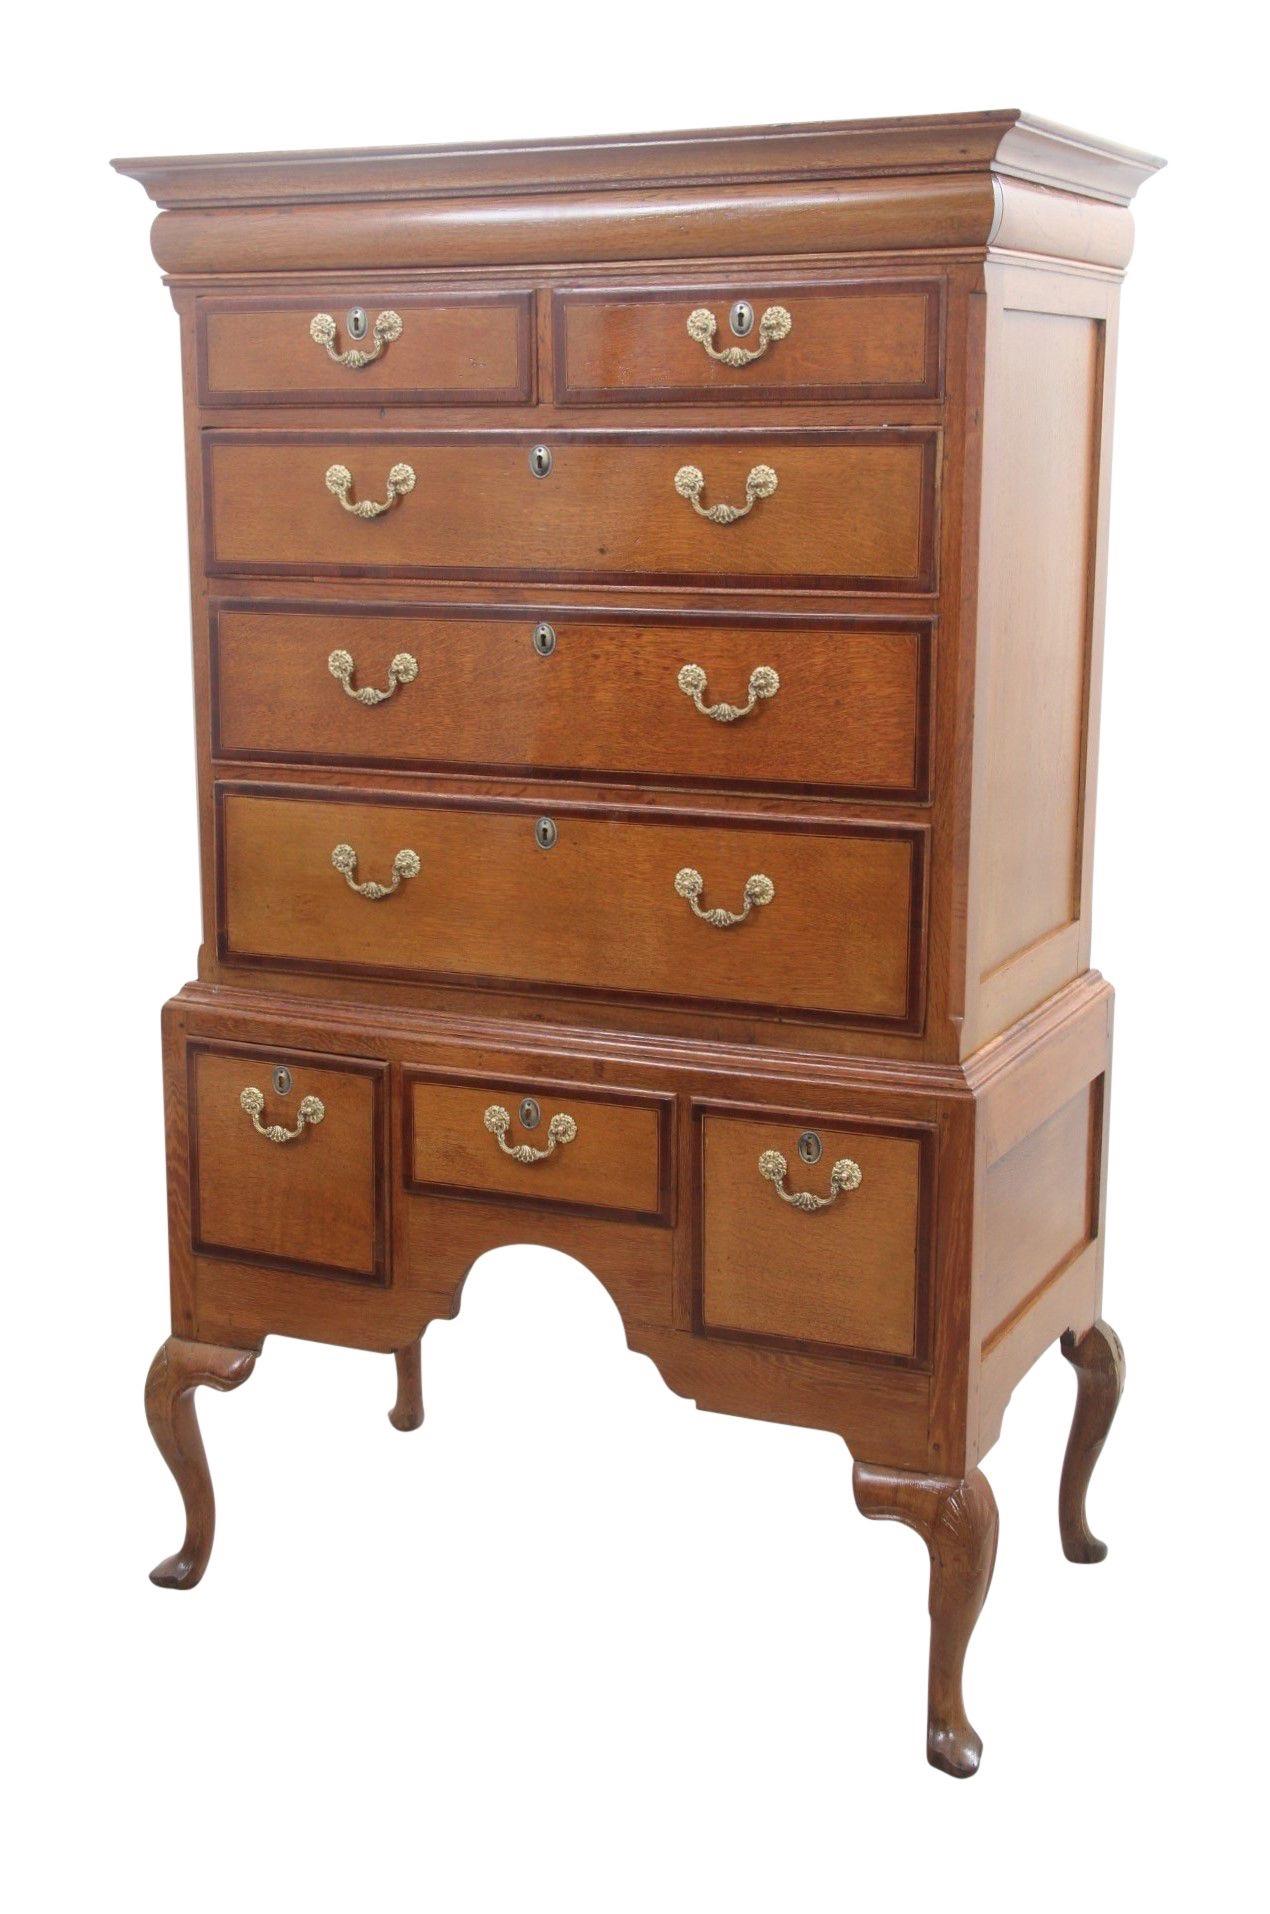 An antique English two-piece highboy dating from the late 1800's. The top cabinet houses two over three drawers, each hand dovetailed with original ornately pressed brass bail handles. Above the drawers and below the crest molding is a secret drawer